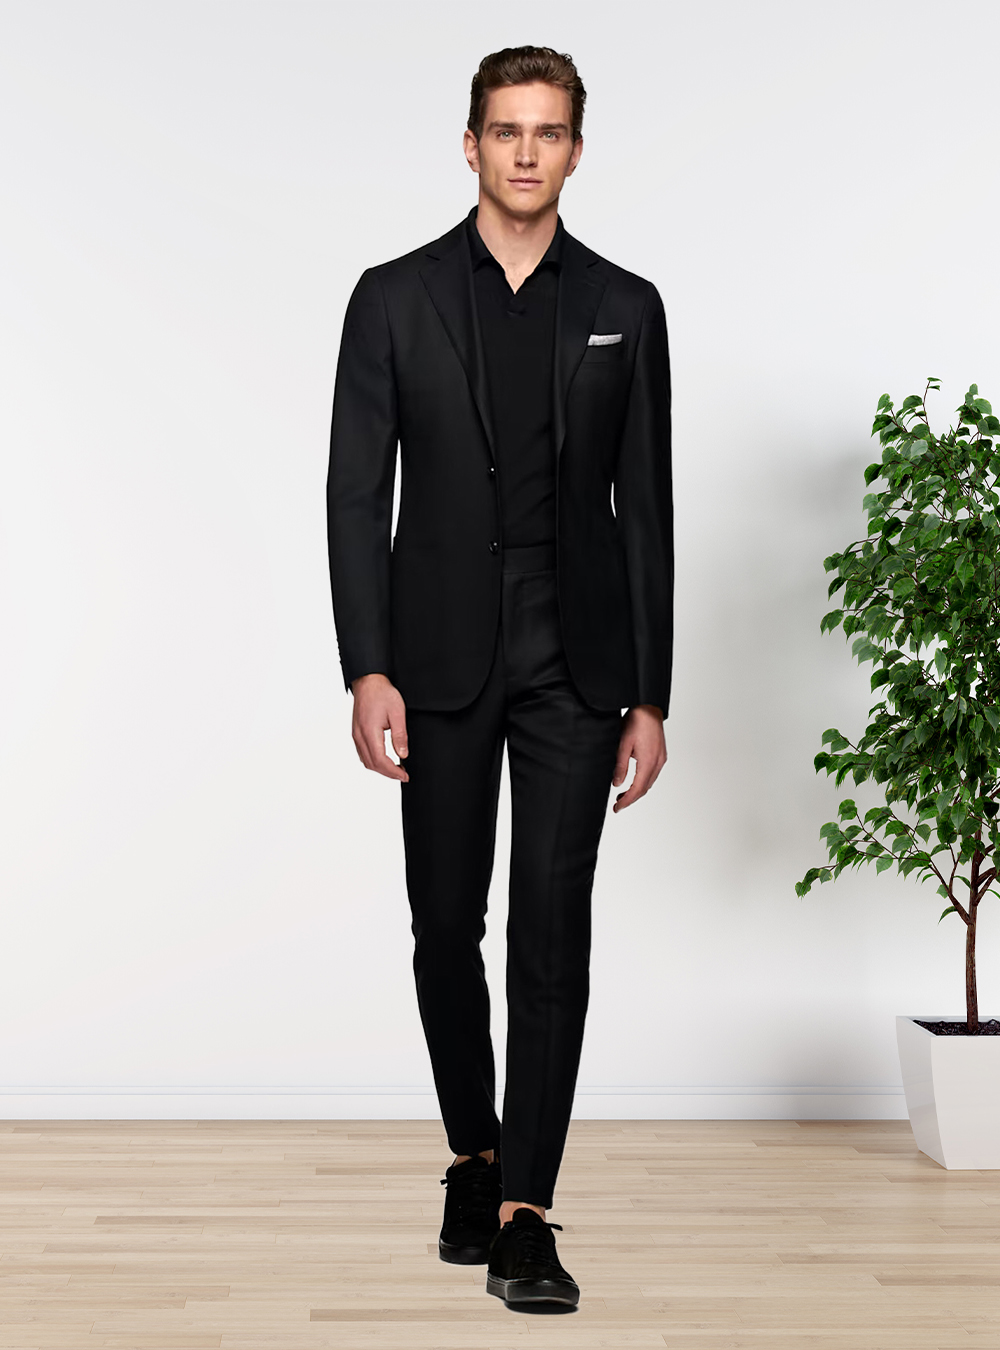 black suit, black polo T-shirt, and black sneakers